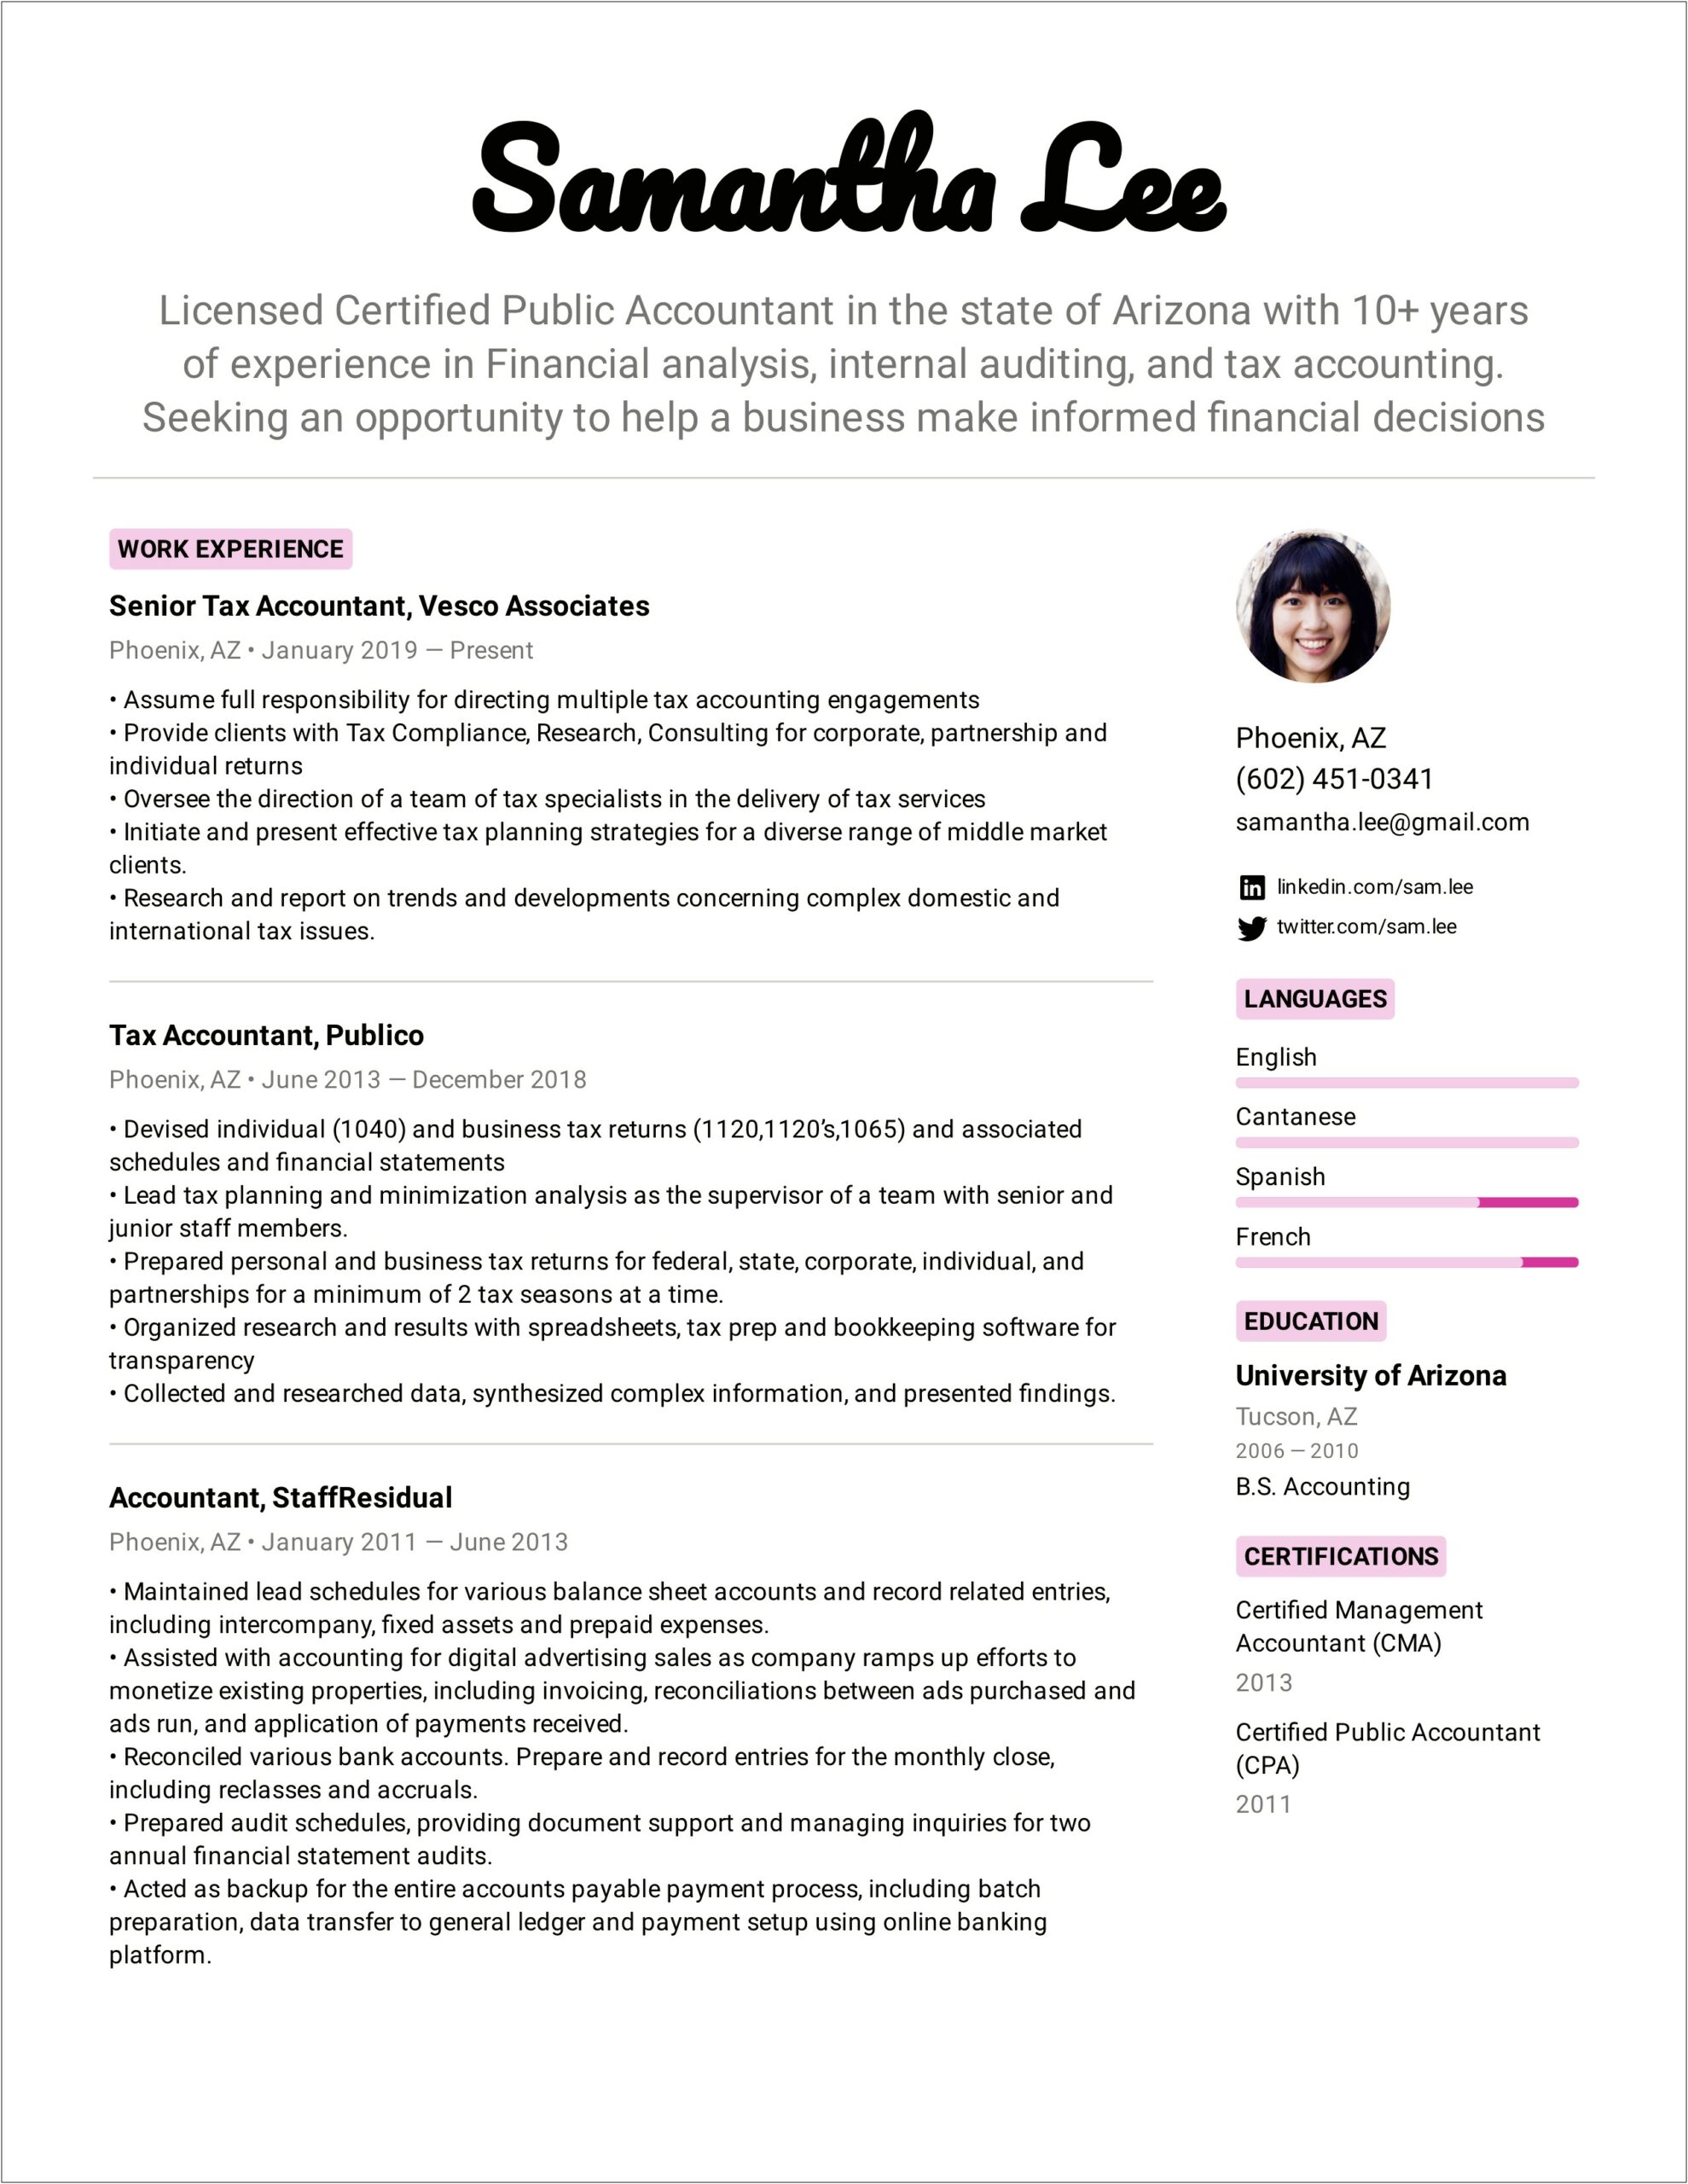 A Sample Resume For An Accountant